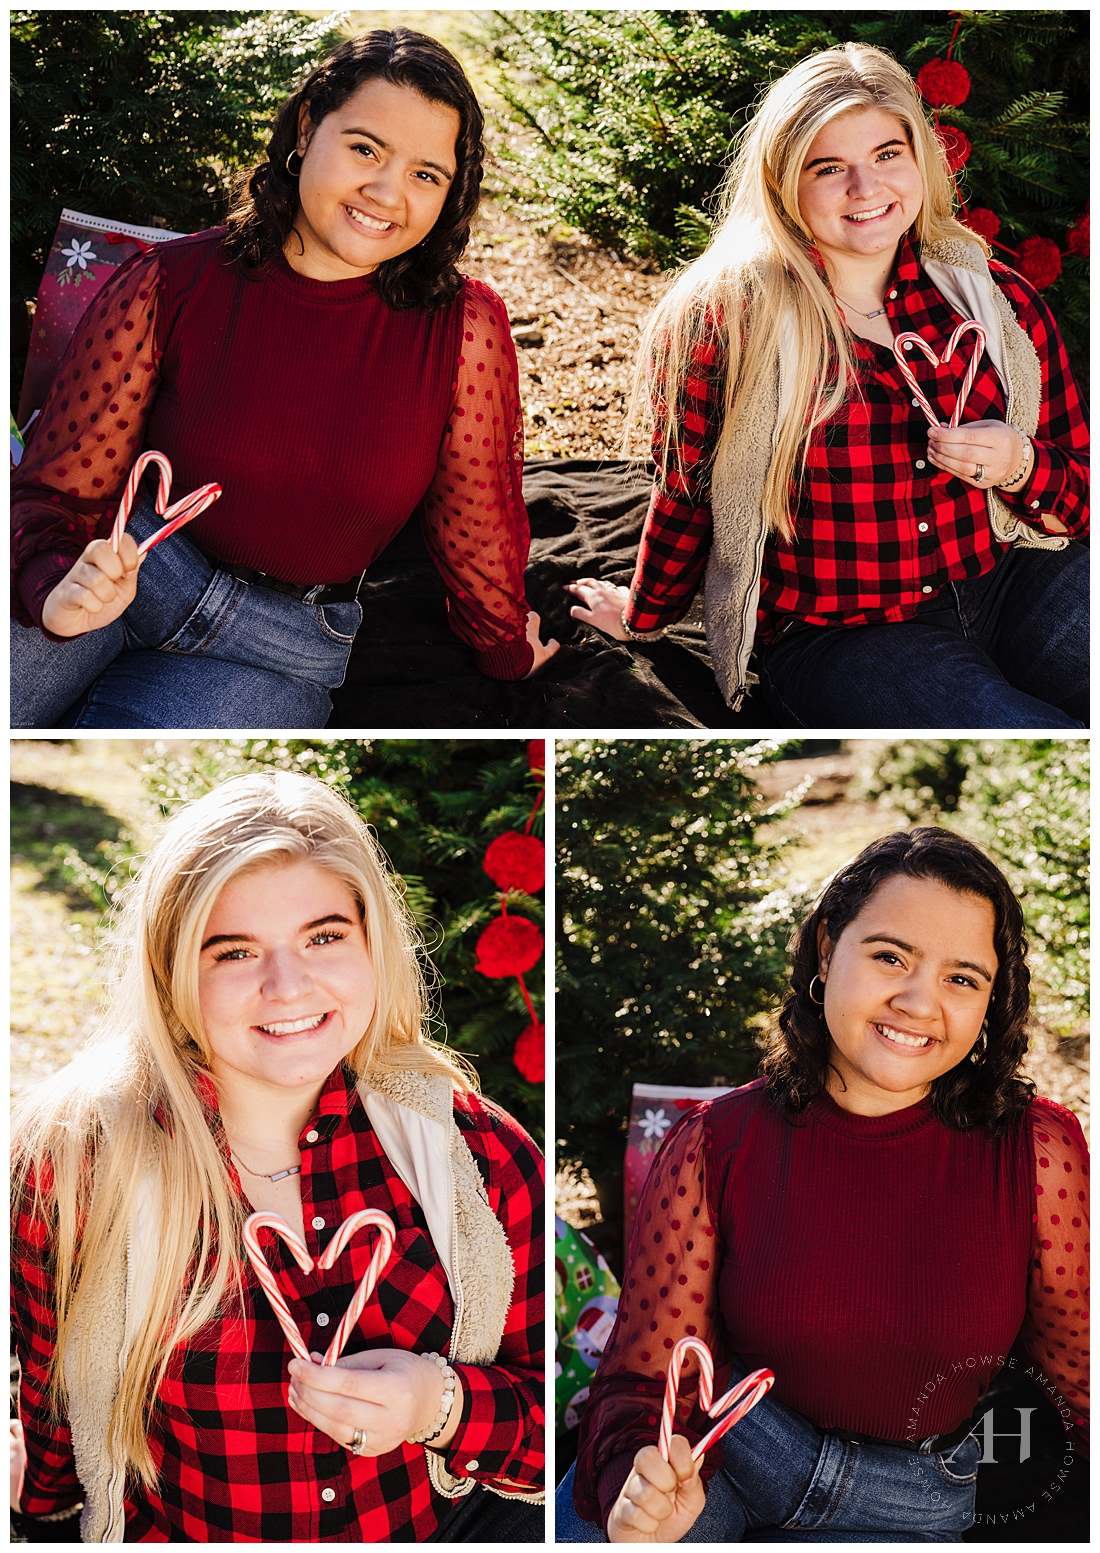 Wondering how to style red for portraits? This blog has all the inspiration with red buffalo shirts, blouses with sheer detailing, and other accessories for Christmas tree farm portraits | Photographed by Tacoma Senior Portrait Photographer Amanda Howse